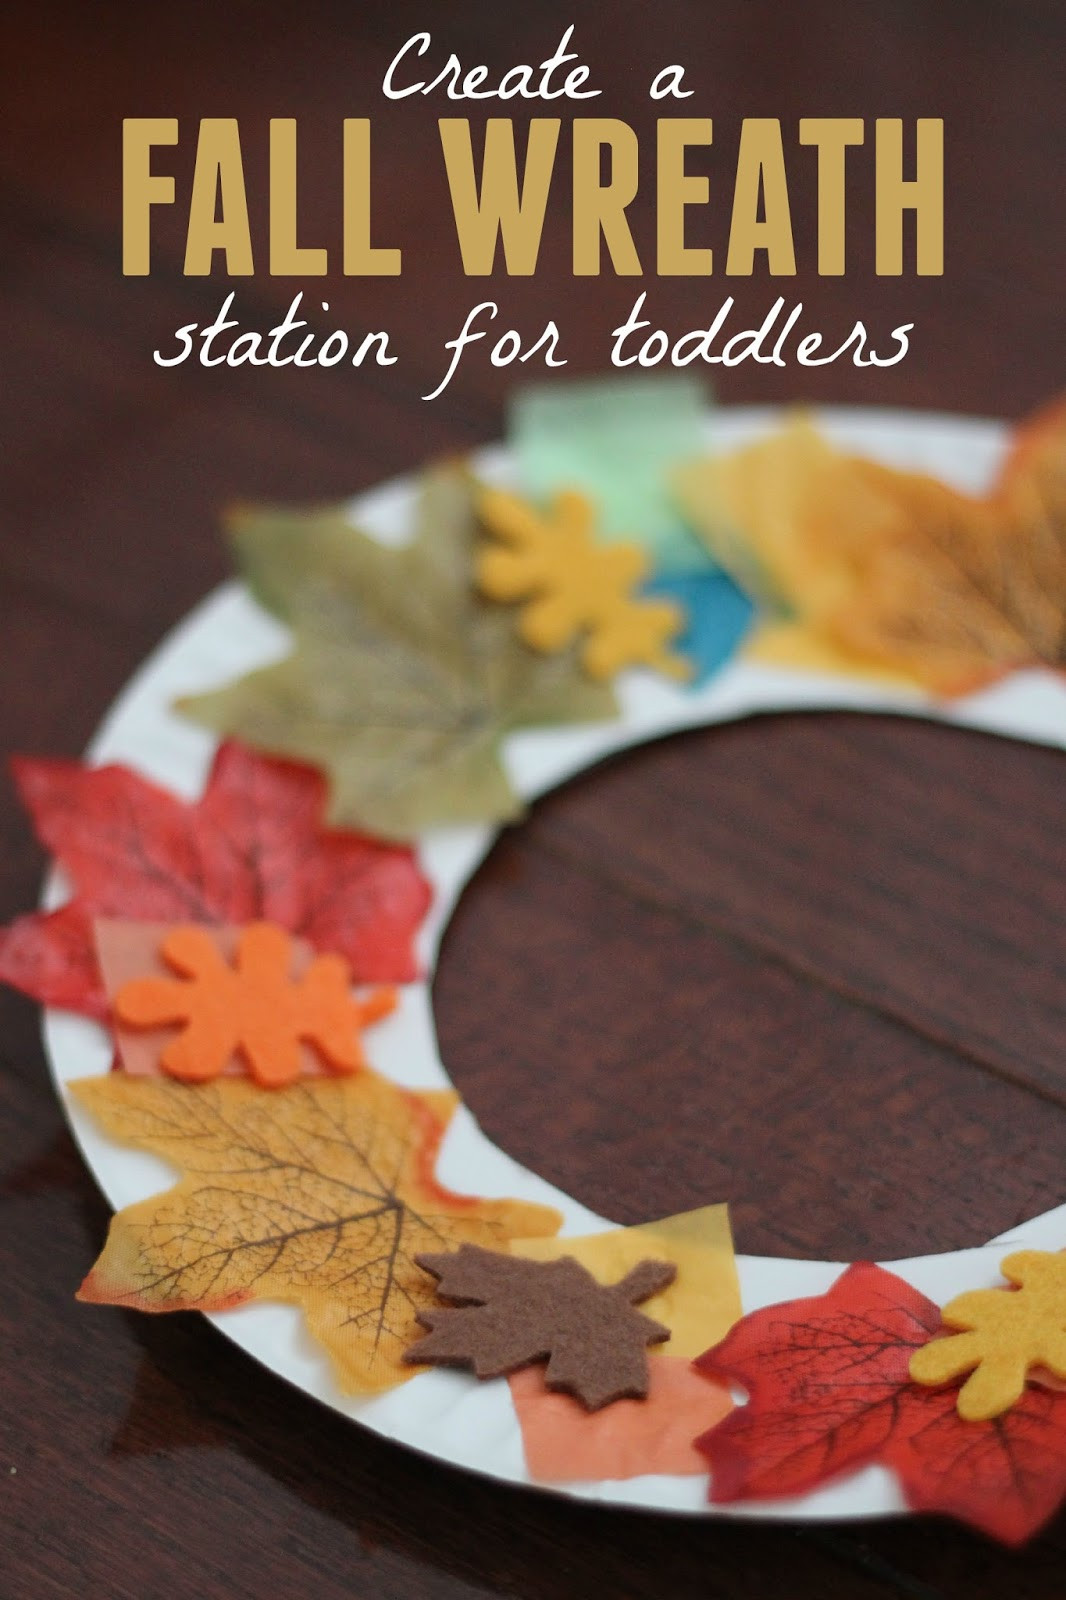 Toddler Fall Craft Ideas
 Toddler Approved Fall Wreath Making Station for Toddlers